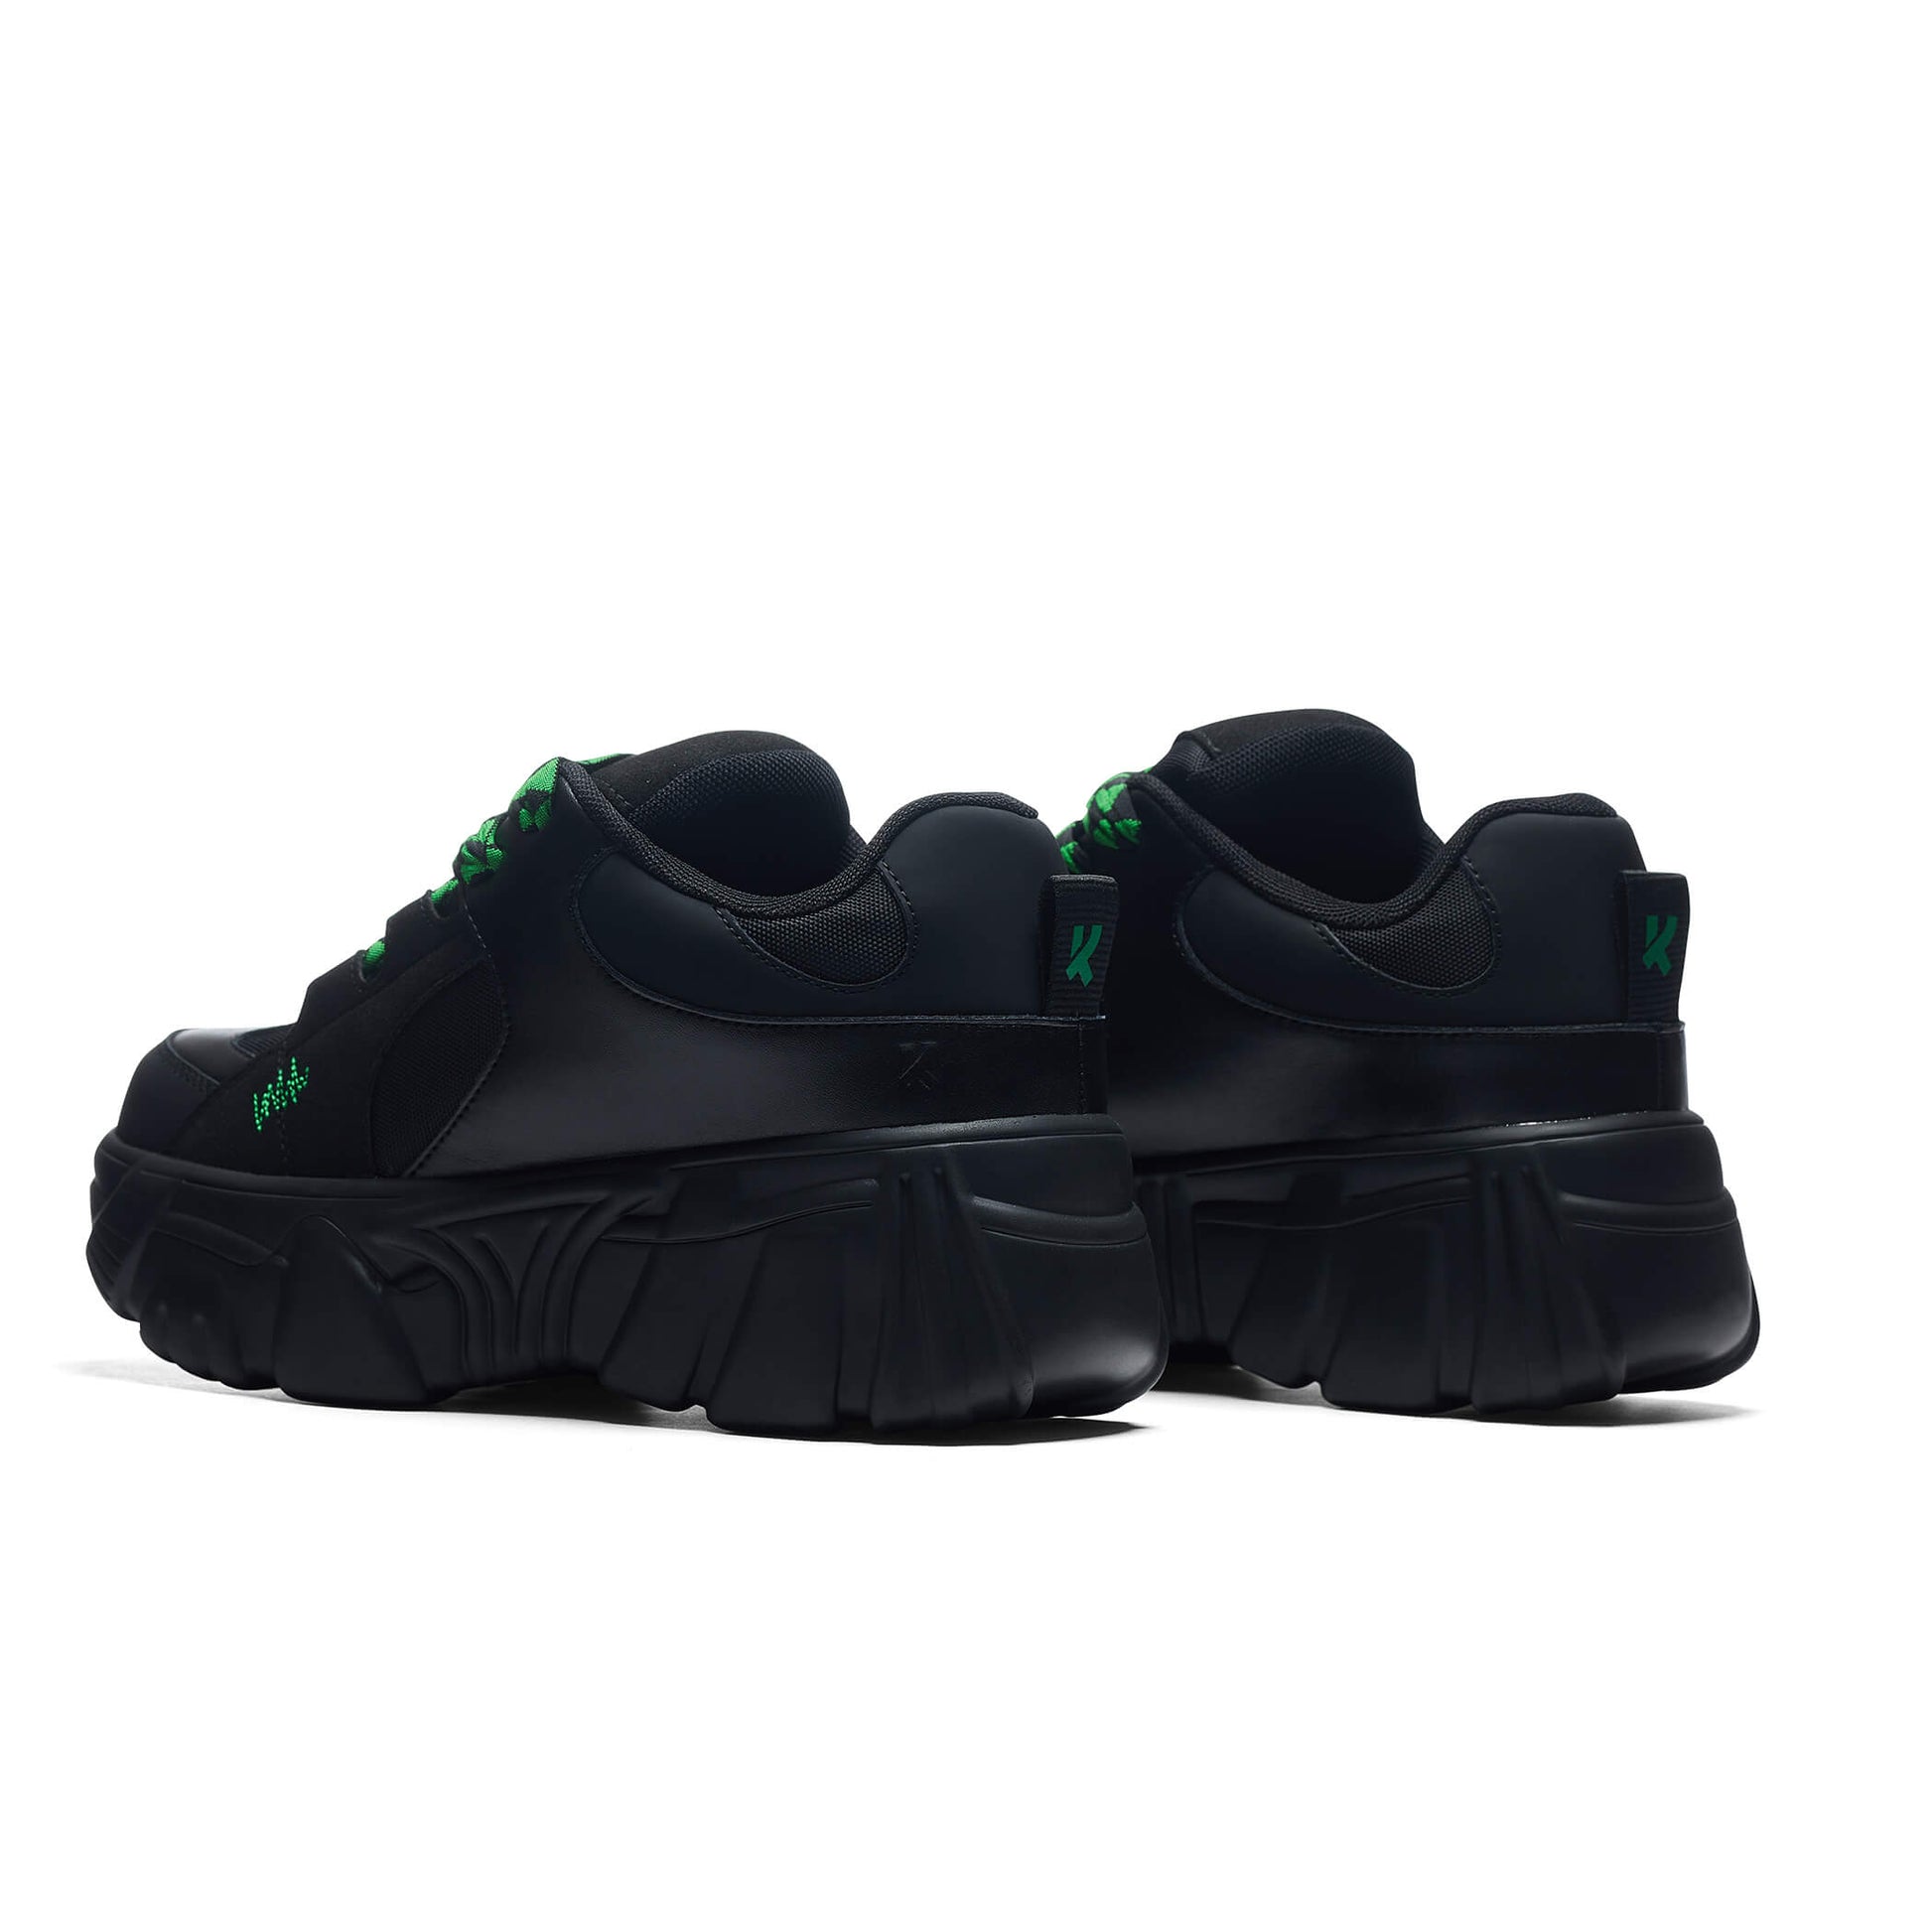 Ricta Flip Men's Chunky Trainers - Green Lace - Trainers - KOI Footwear - Black - Back View